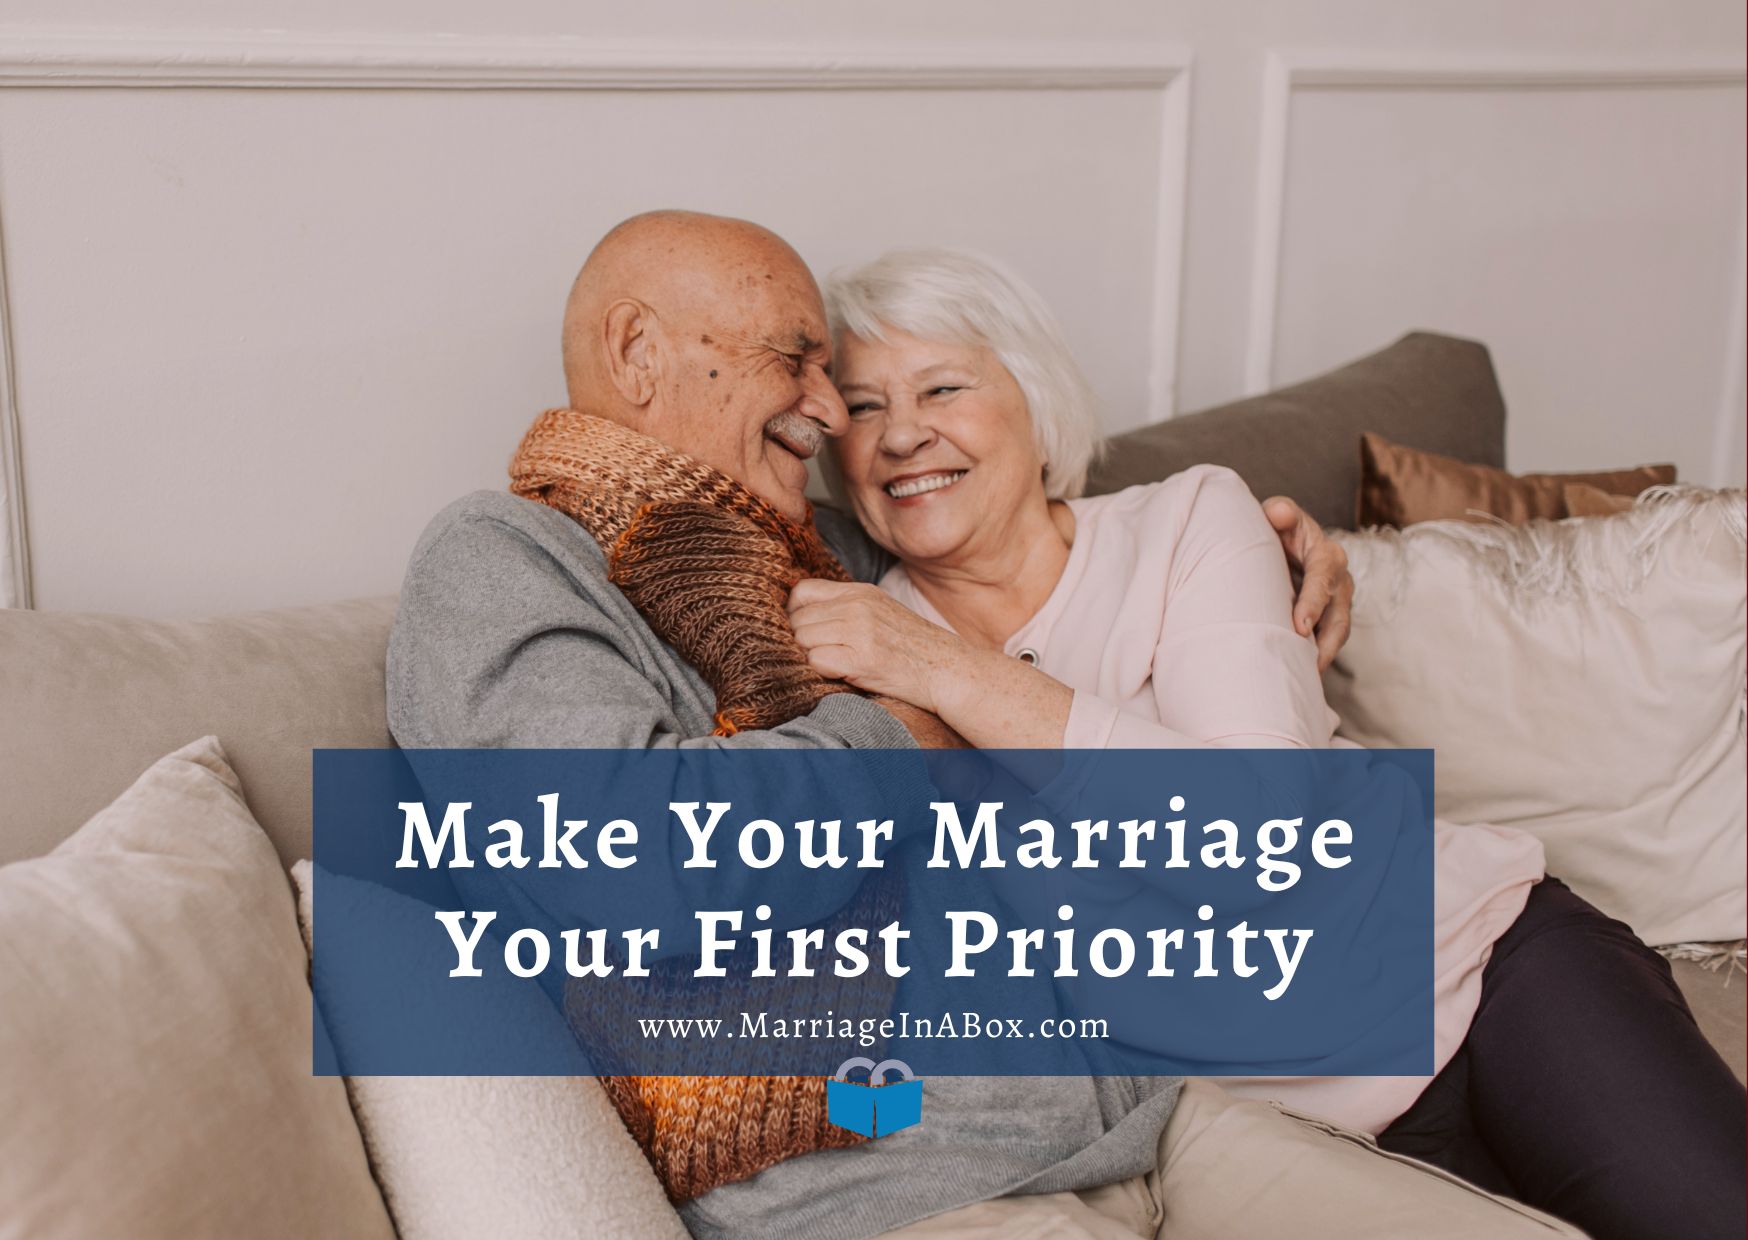 Make Your Marriage Your First Priority